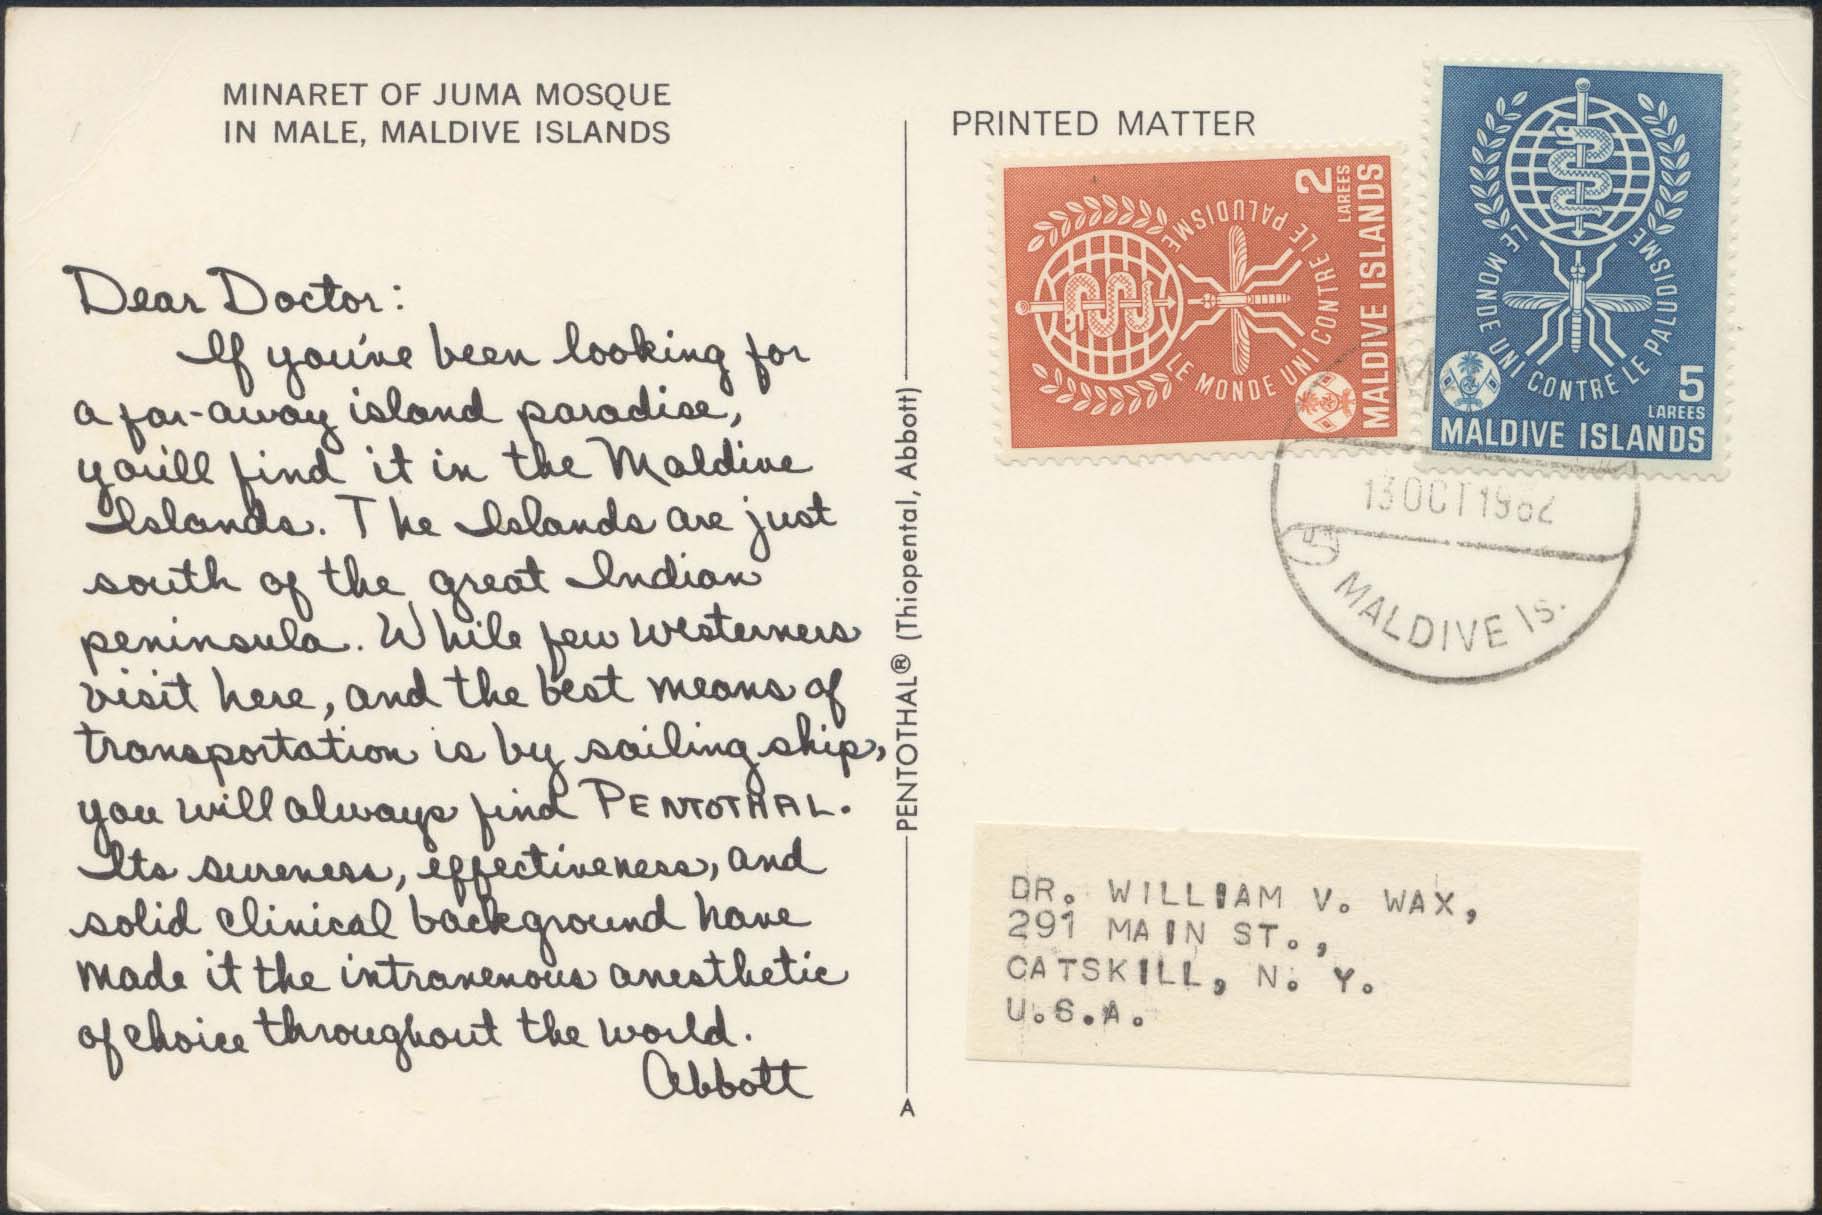 Dear Doctor Postcard - Type A - United States - 1962, Oct 13